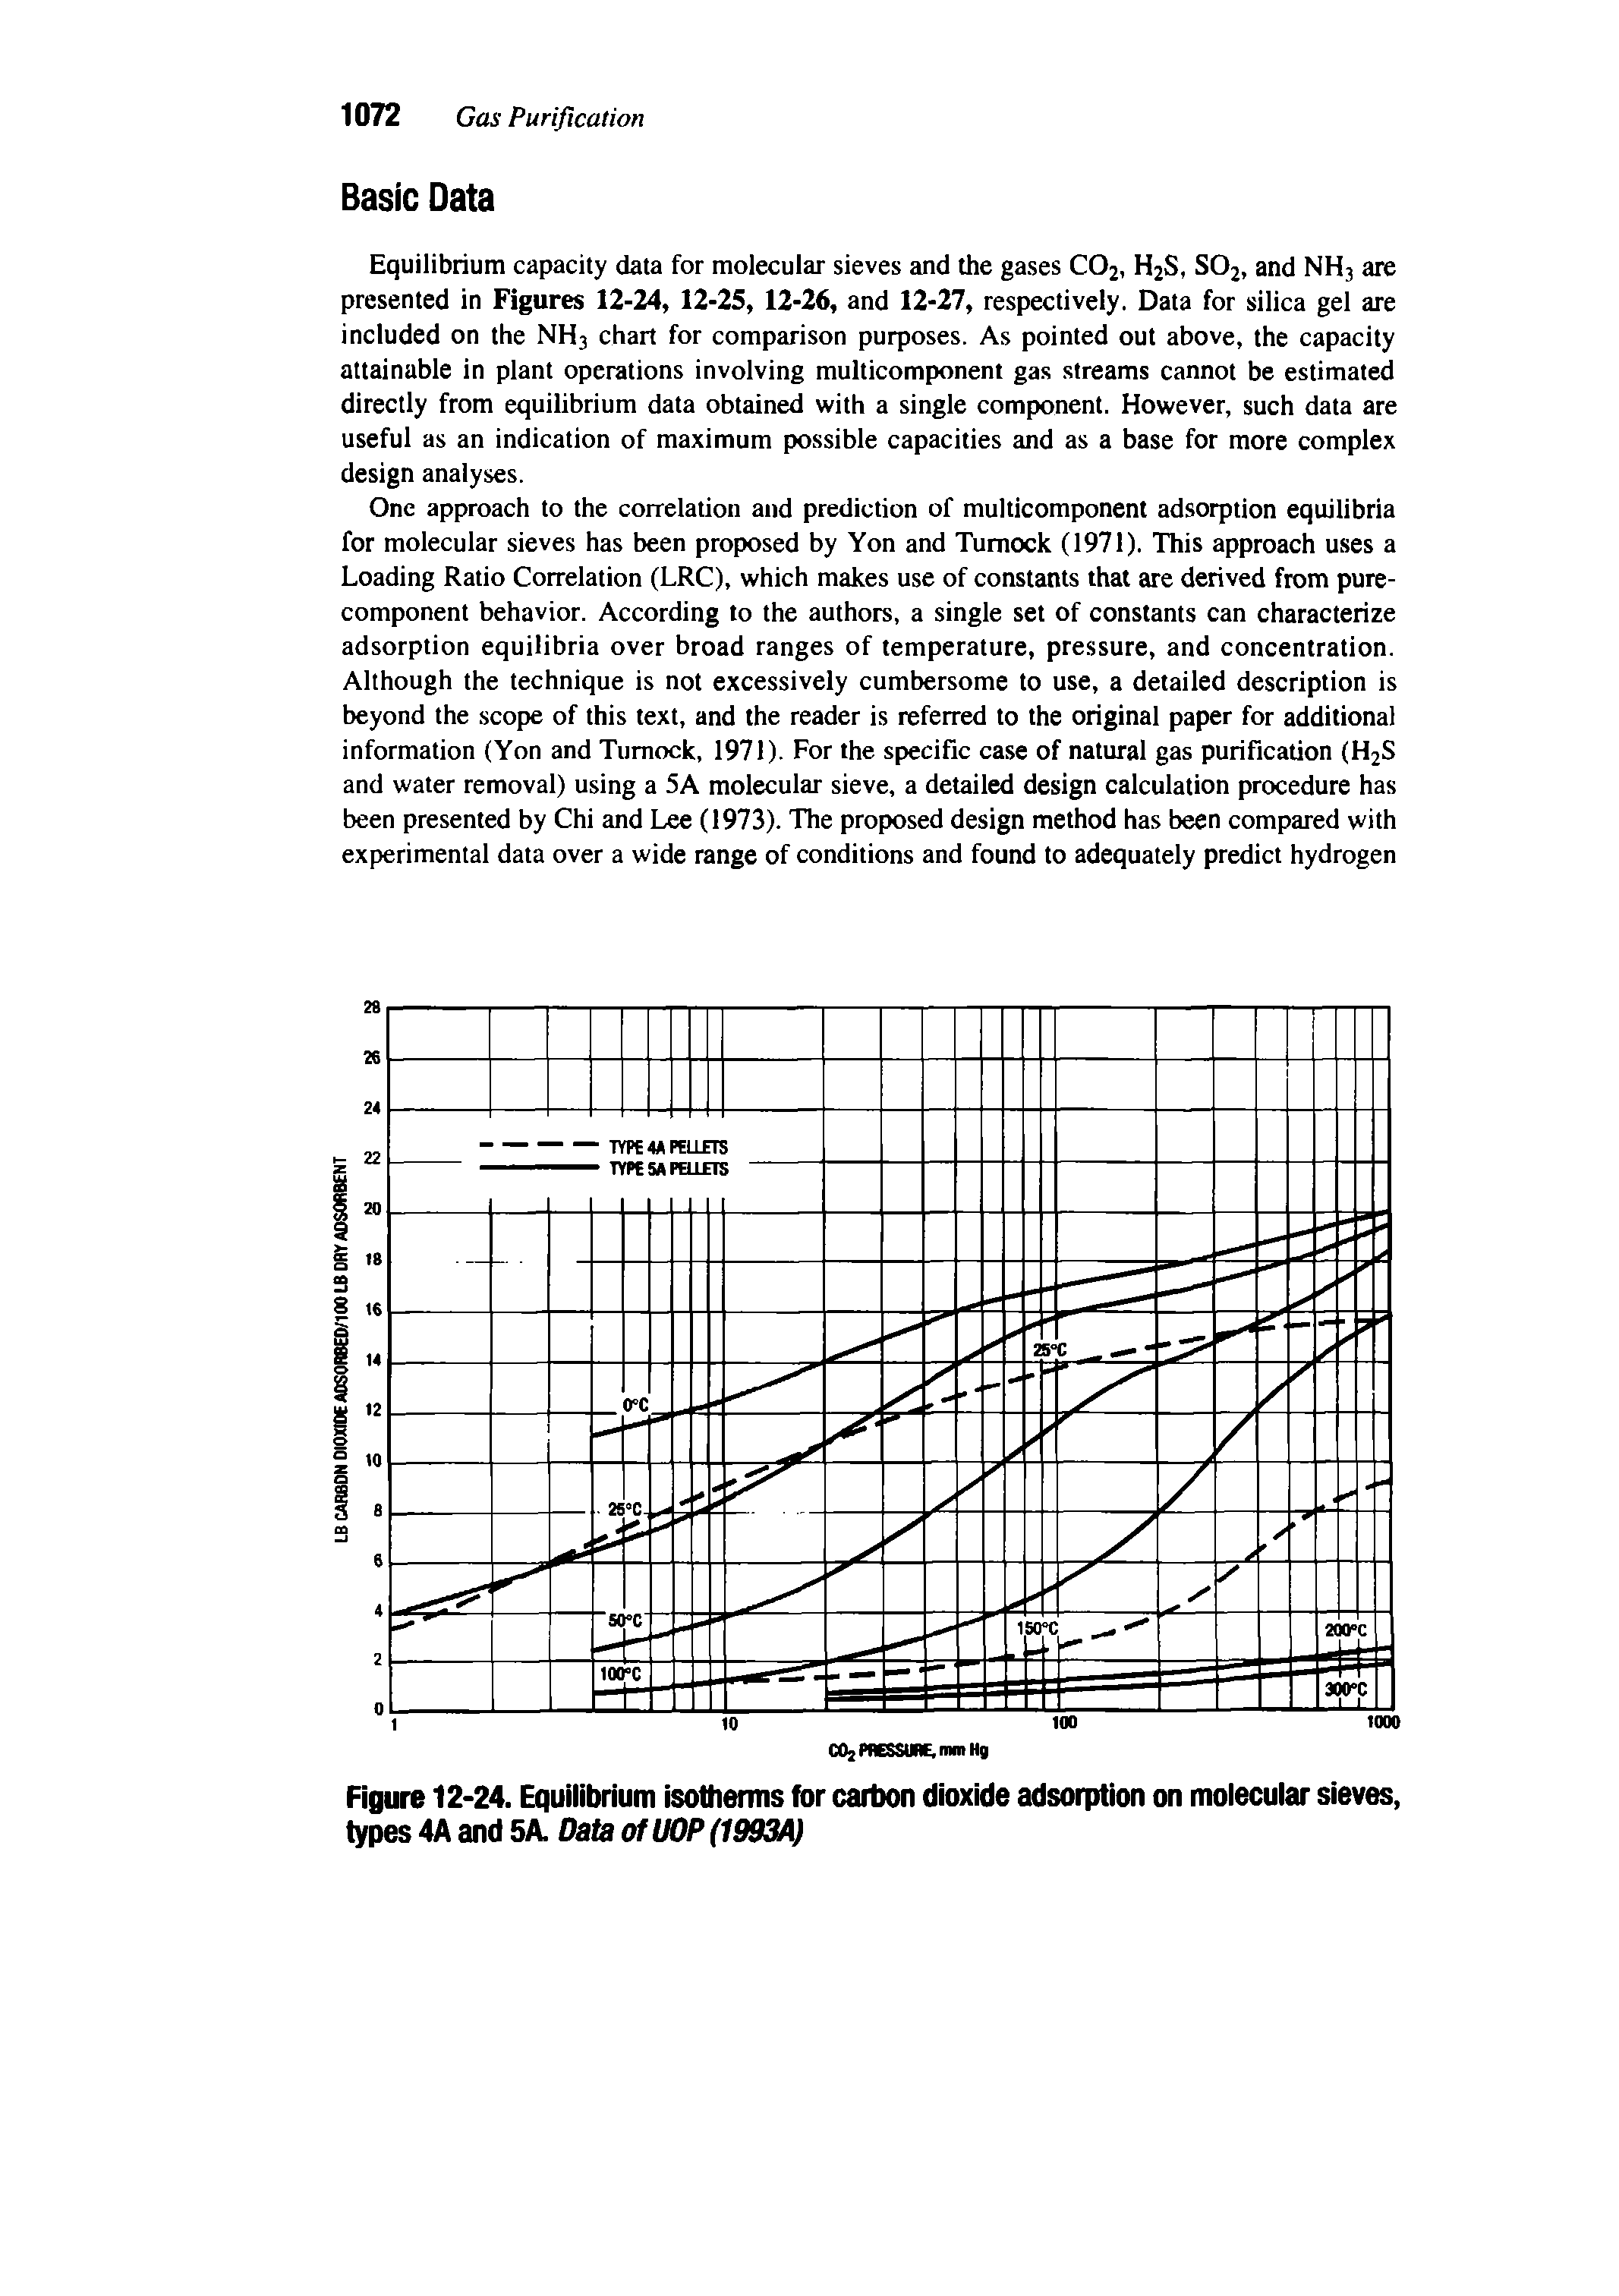 Figure 12 24. Equilibrium isotherms for carbon dioxide adsorption on molecular sieves, types 4A and 5A. Data ofU0P(1993/ ...